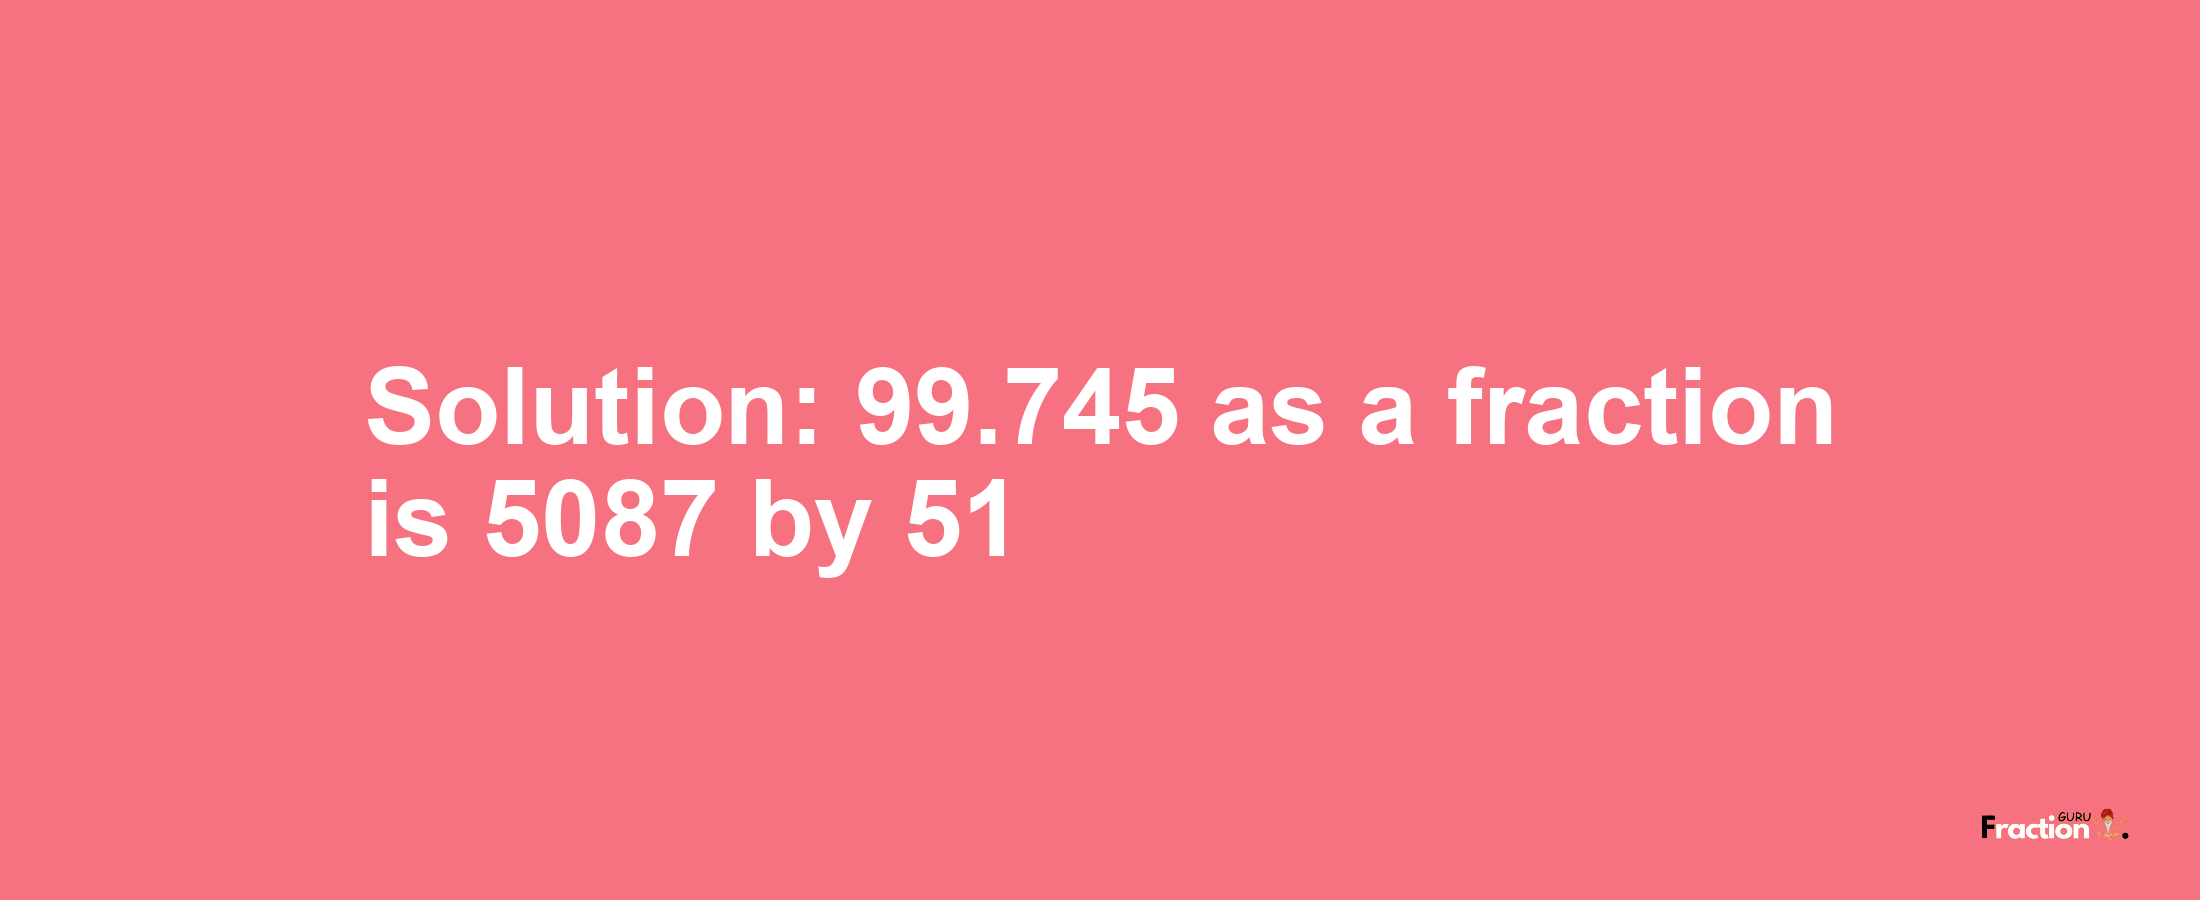 Solution:99.745 as a fraction is 5087/51